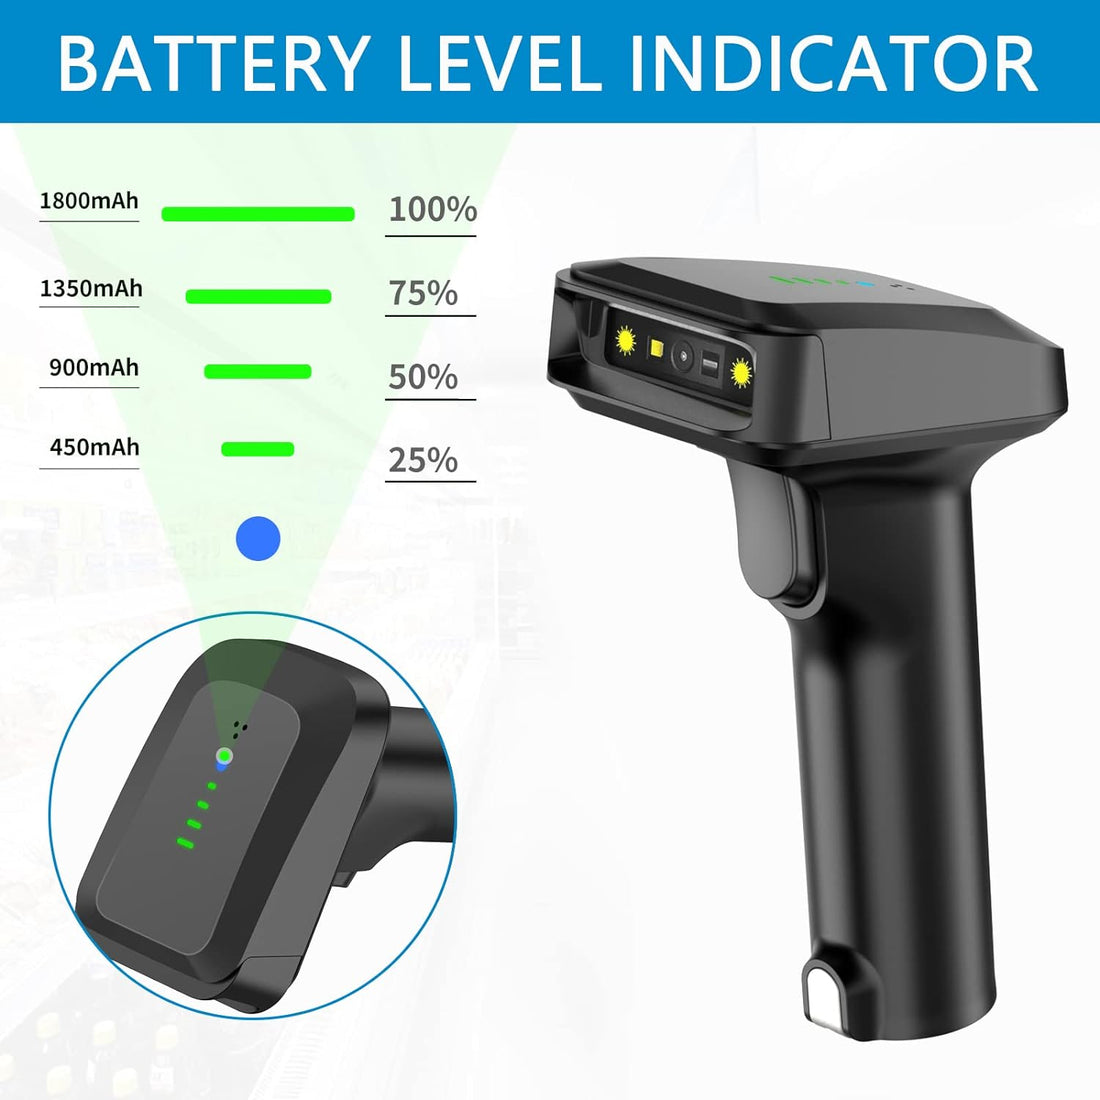 Bluetooth Barcode Scanner with Battery Level Indicator QR Bar Code Reader, 2.4G Wireless & USB Wired Barcode Scanner Connect Phone, PC, Work with Windows, Mac,Android, iOS, for Store, Warehouse